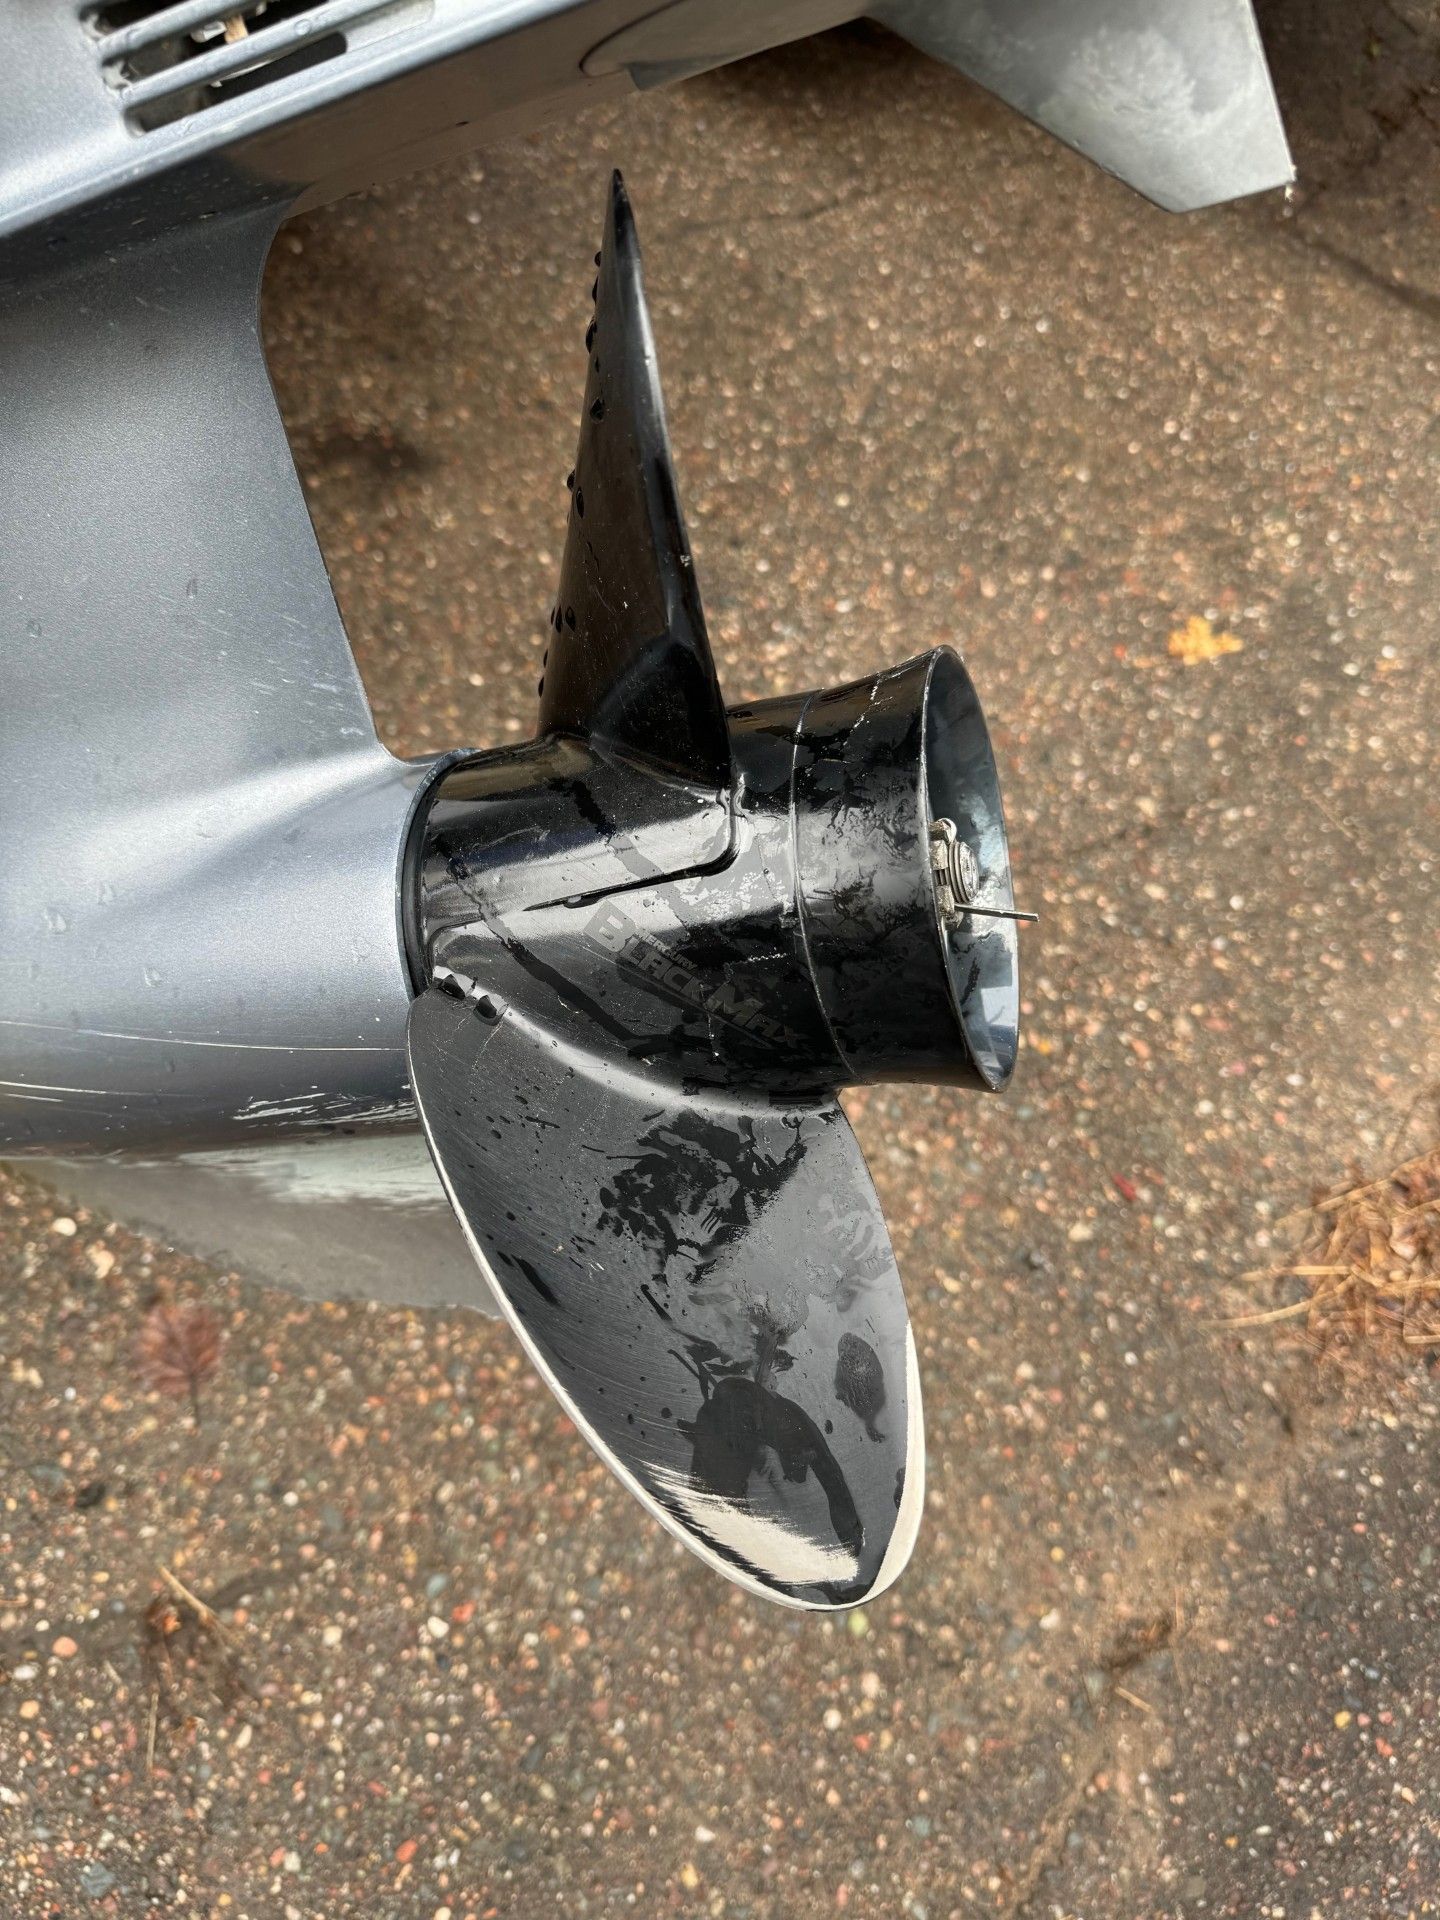 A close up of a boat propeller on the ground.